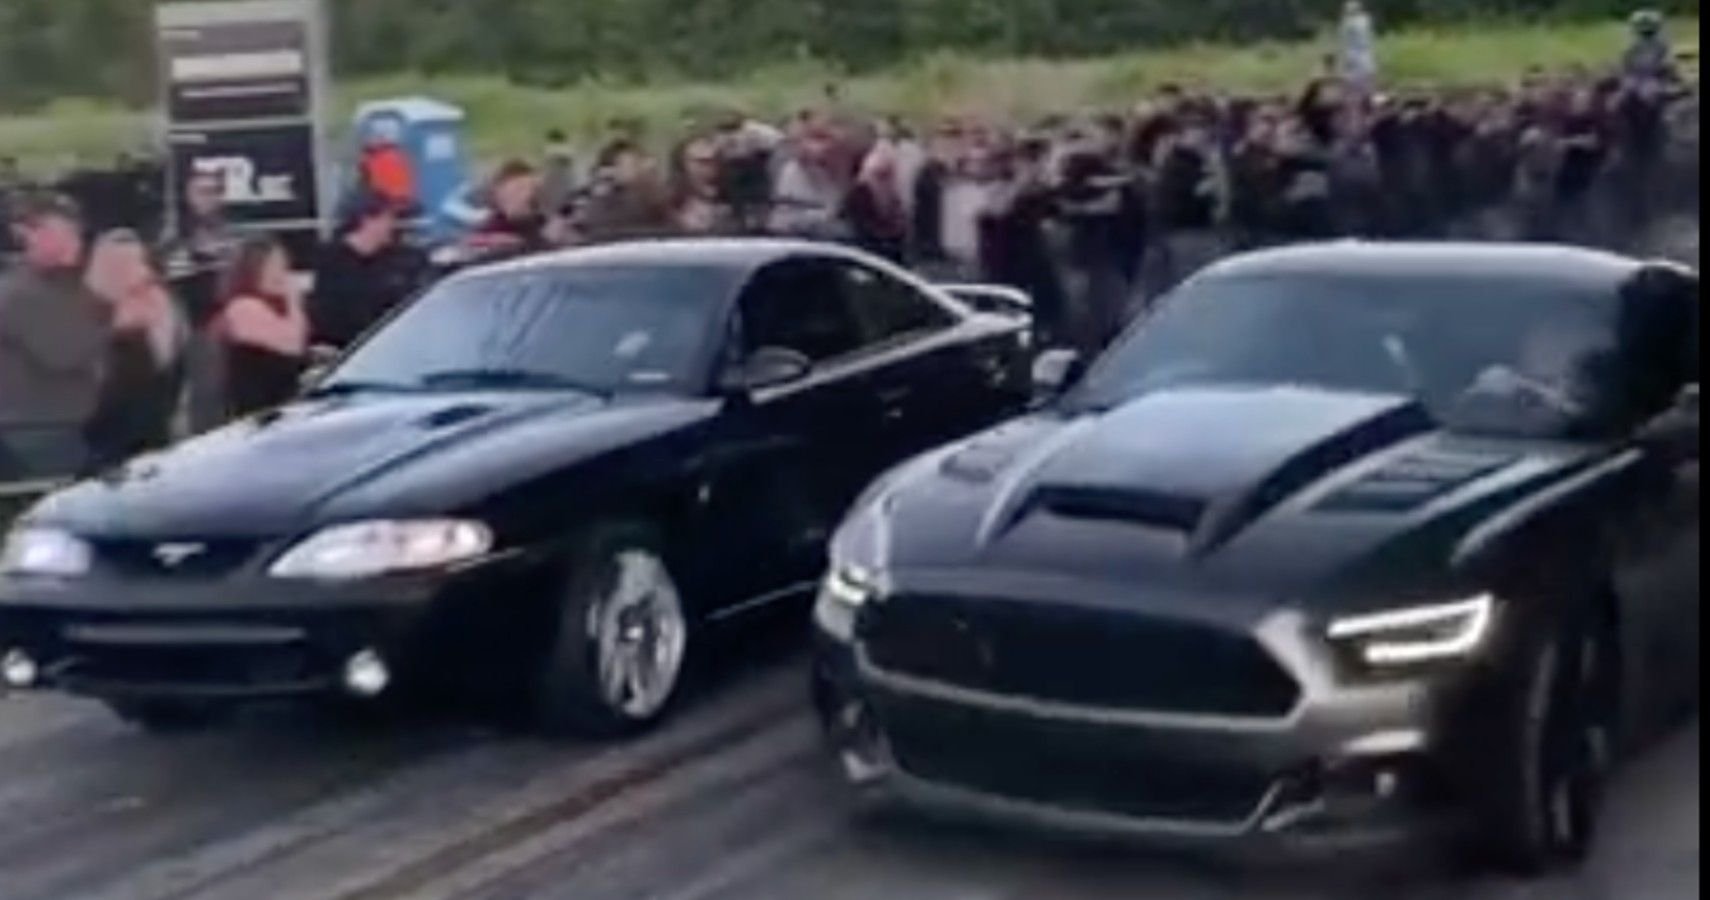 Watch: Sparks Fly As Mustang Swerves Into Power Pole During Drag Race